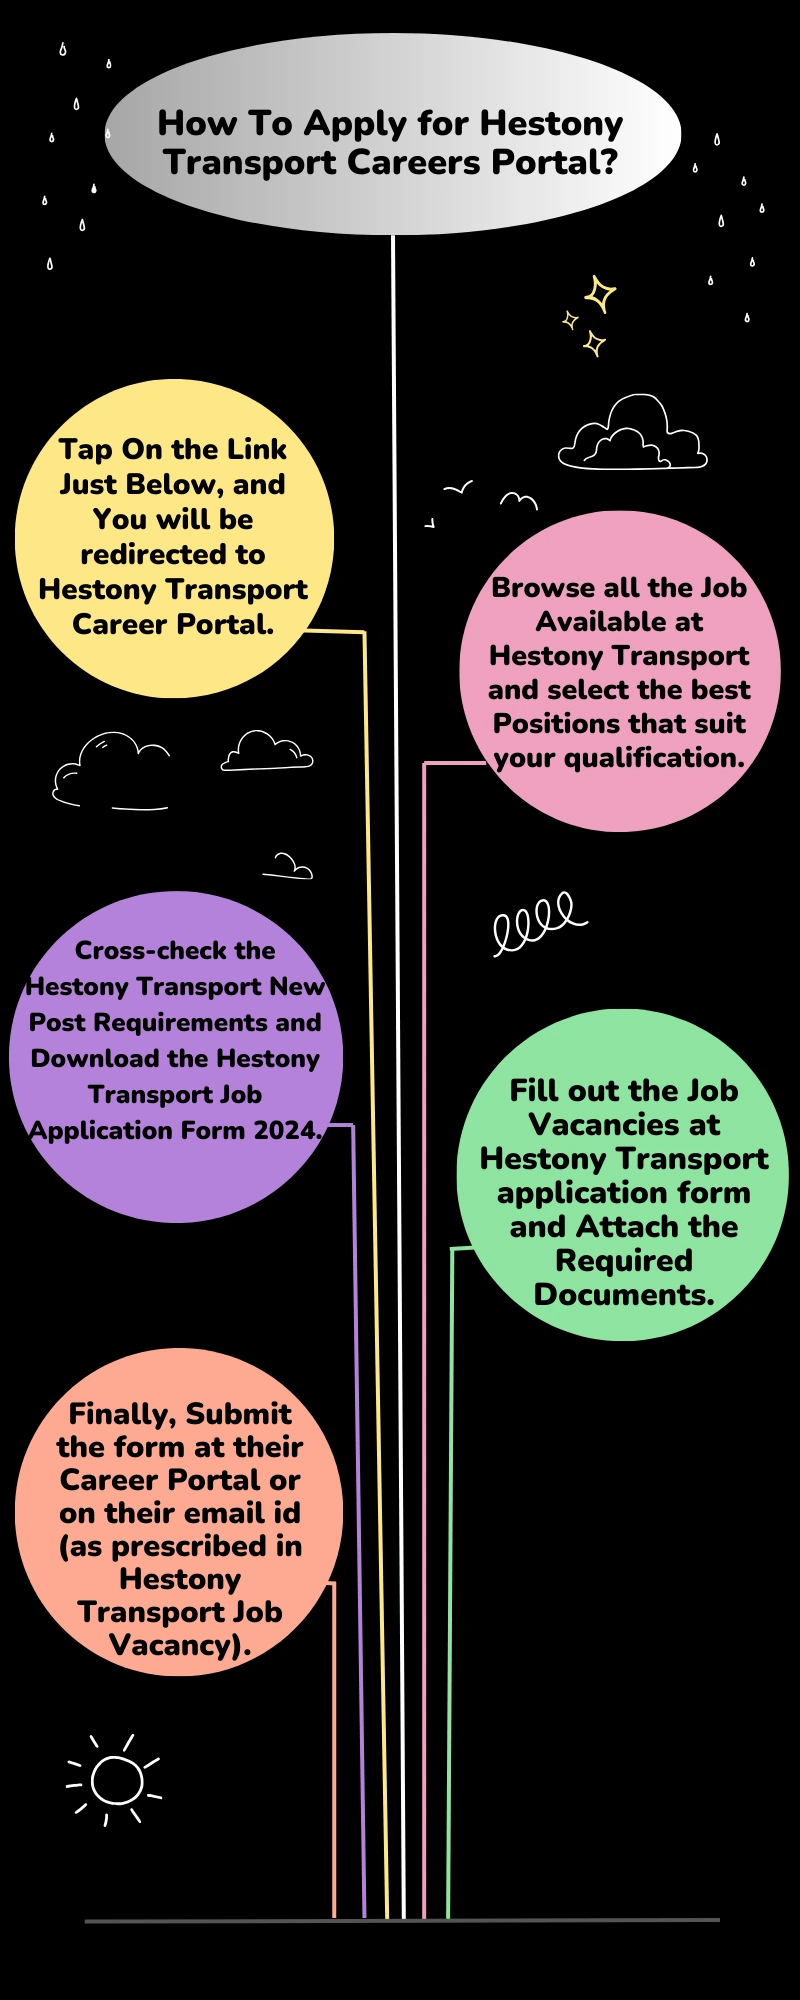 How To Apply for Hestony Transport Careers Portal?